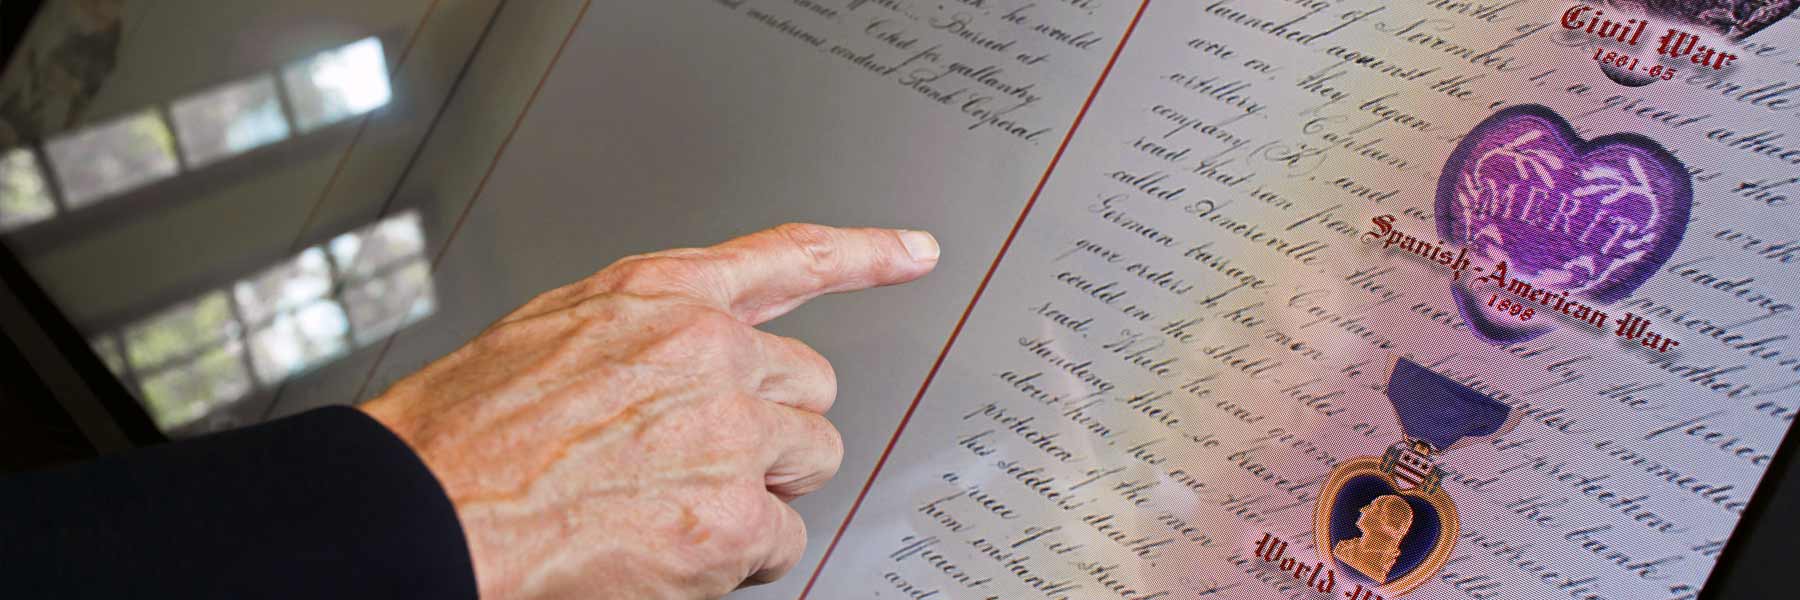 A close up of a hand scanning names in the Golden Book